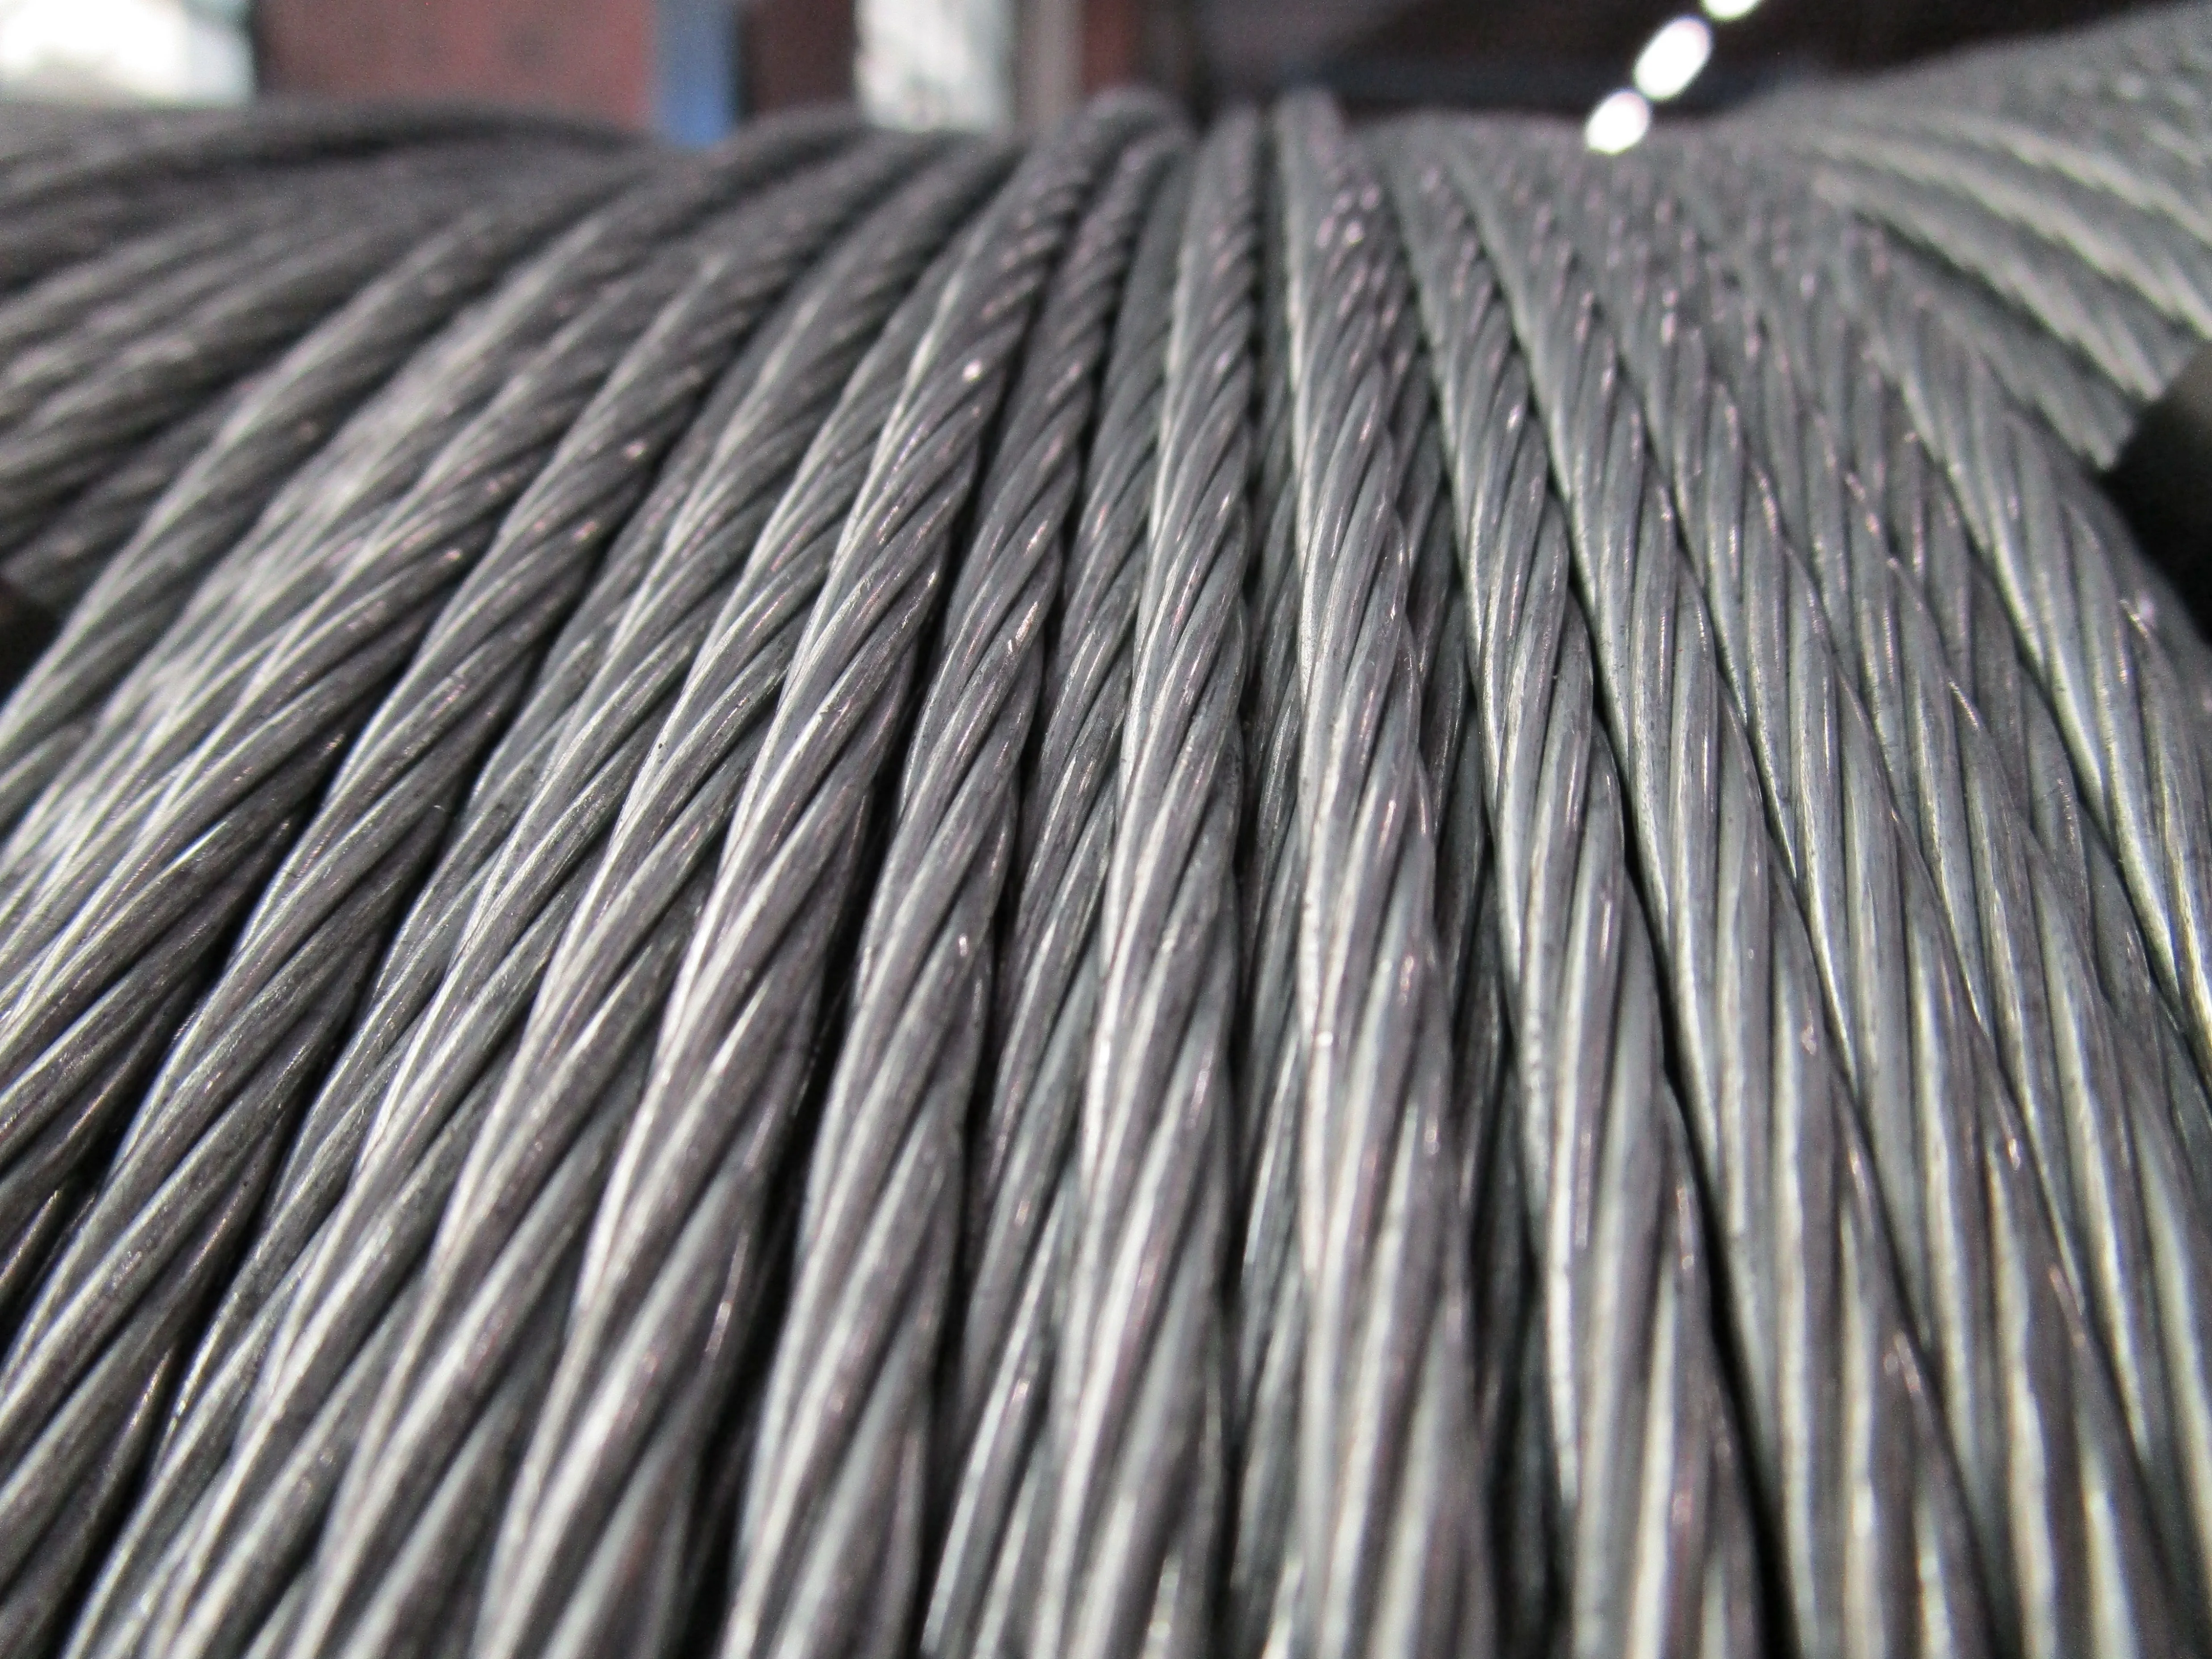 Top quality Italian 1x7 galv. steel wire ropes for agriculture